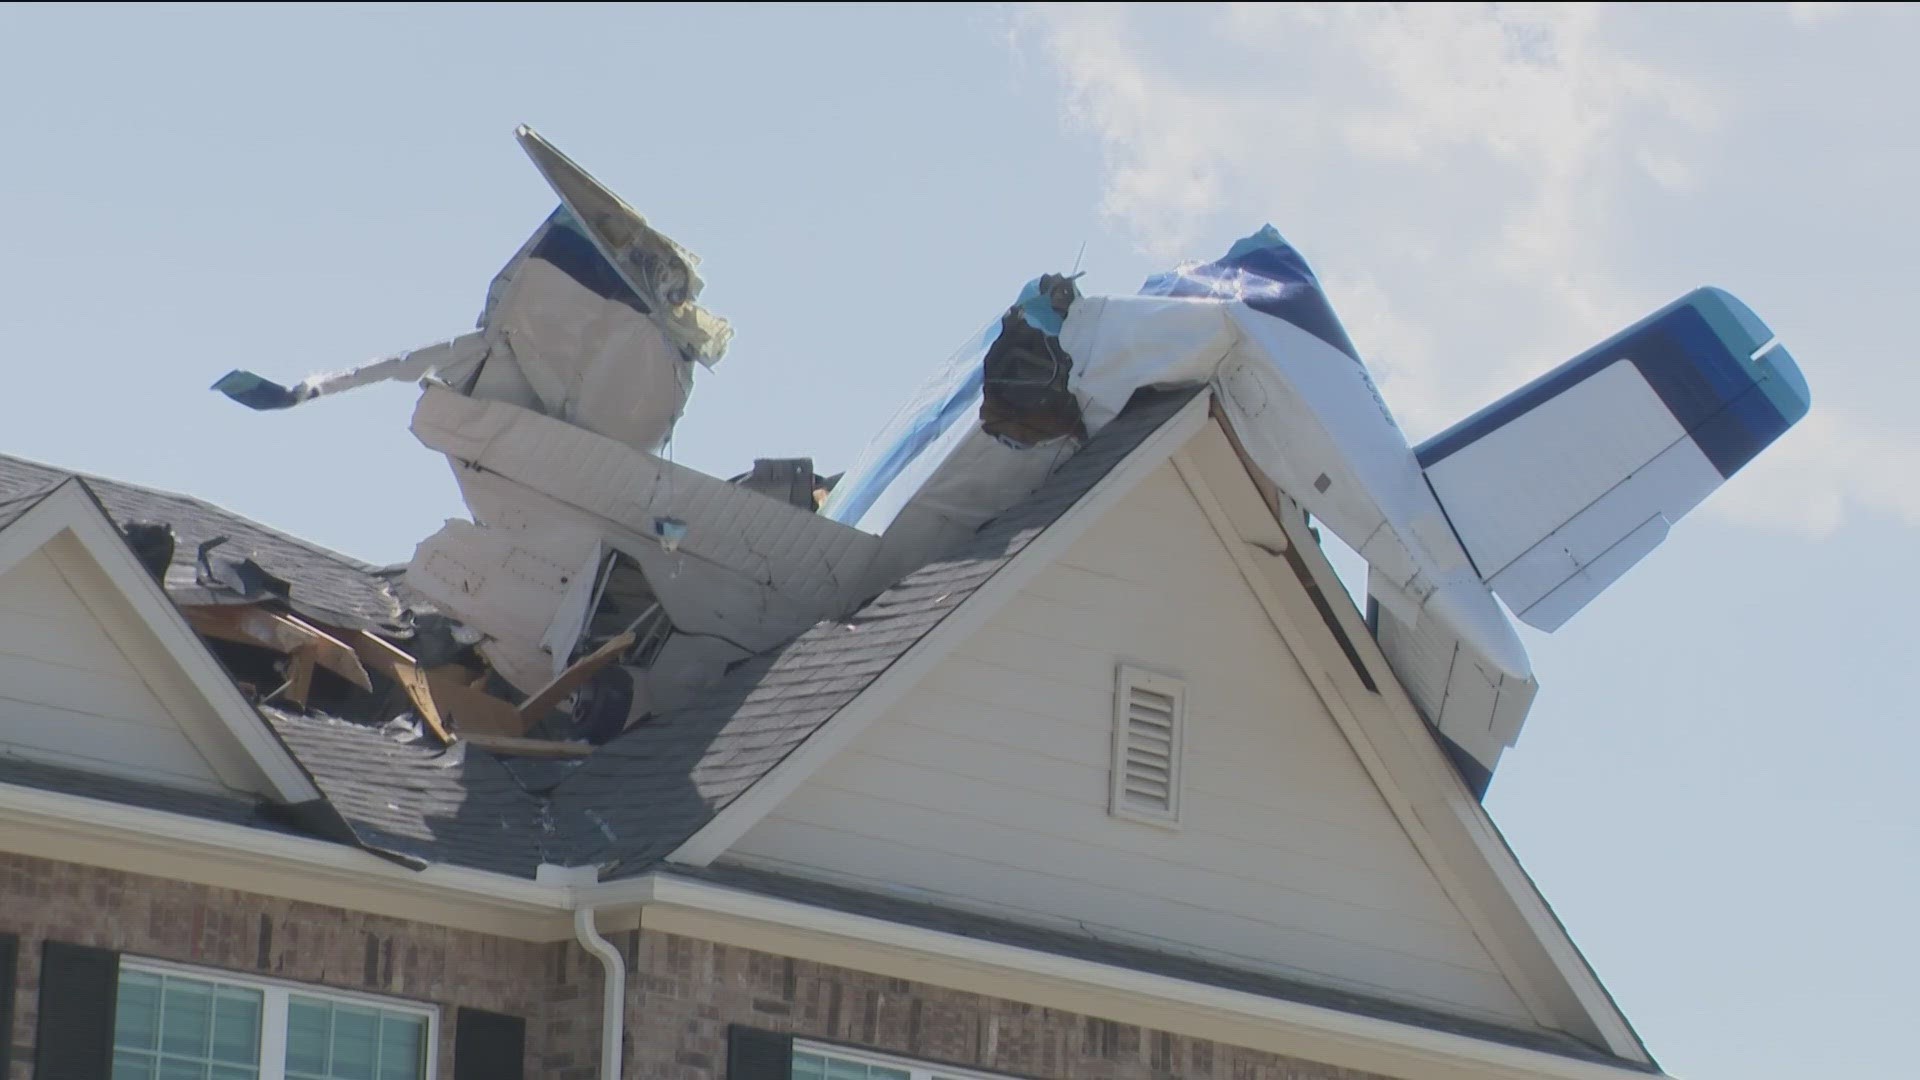 Investigators are looking into why the plane crashed into a house.